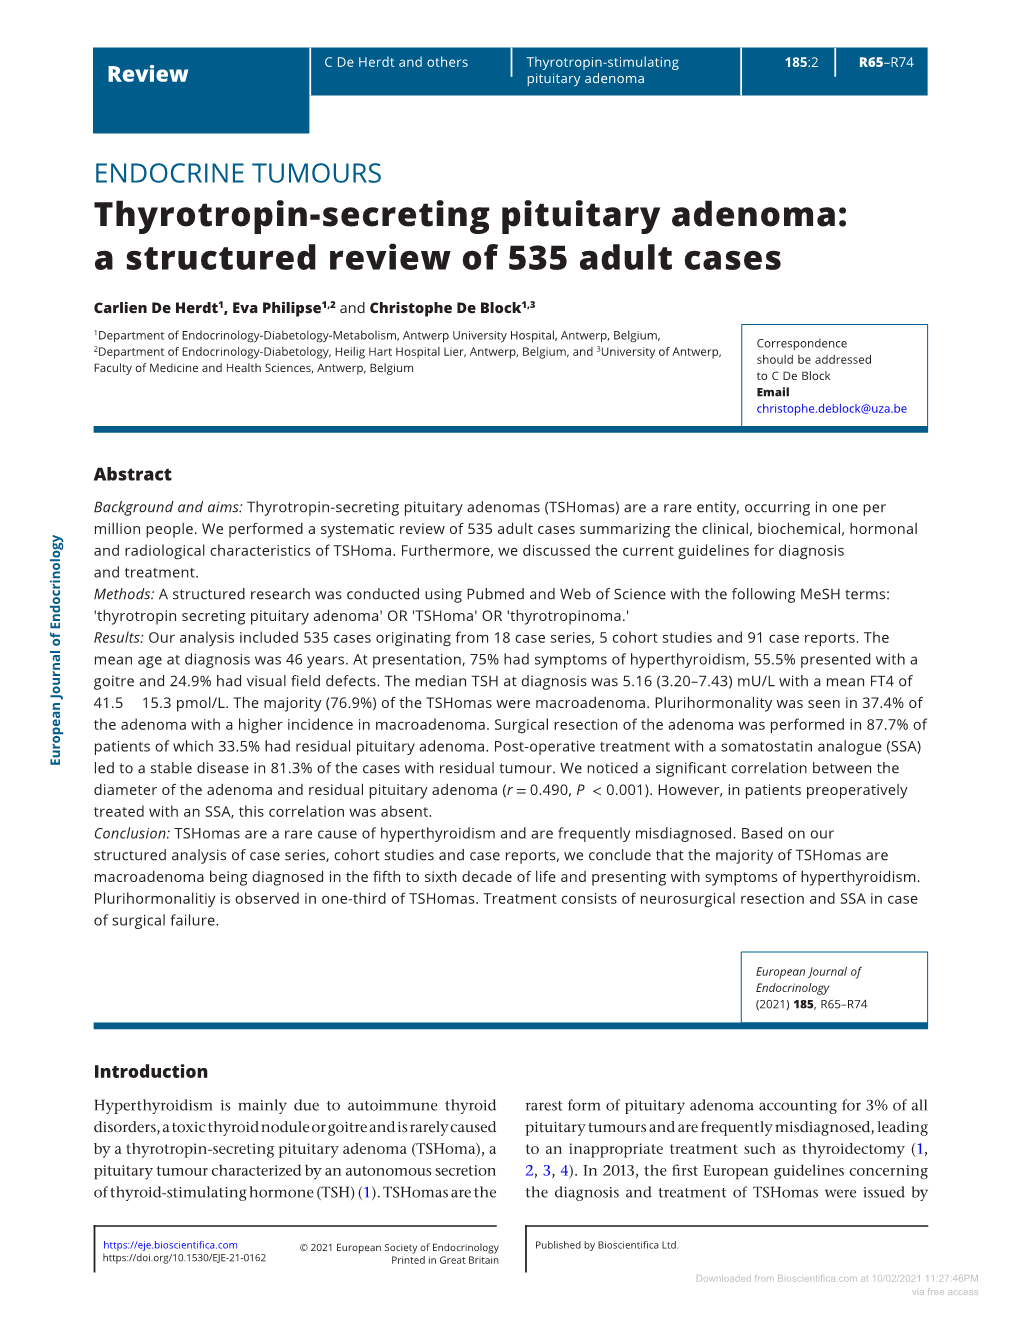 Thyrotropin-Secreting Pituitary Adenoma: a Structured Review of 535 Adult Cases